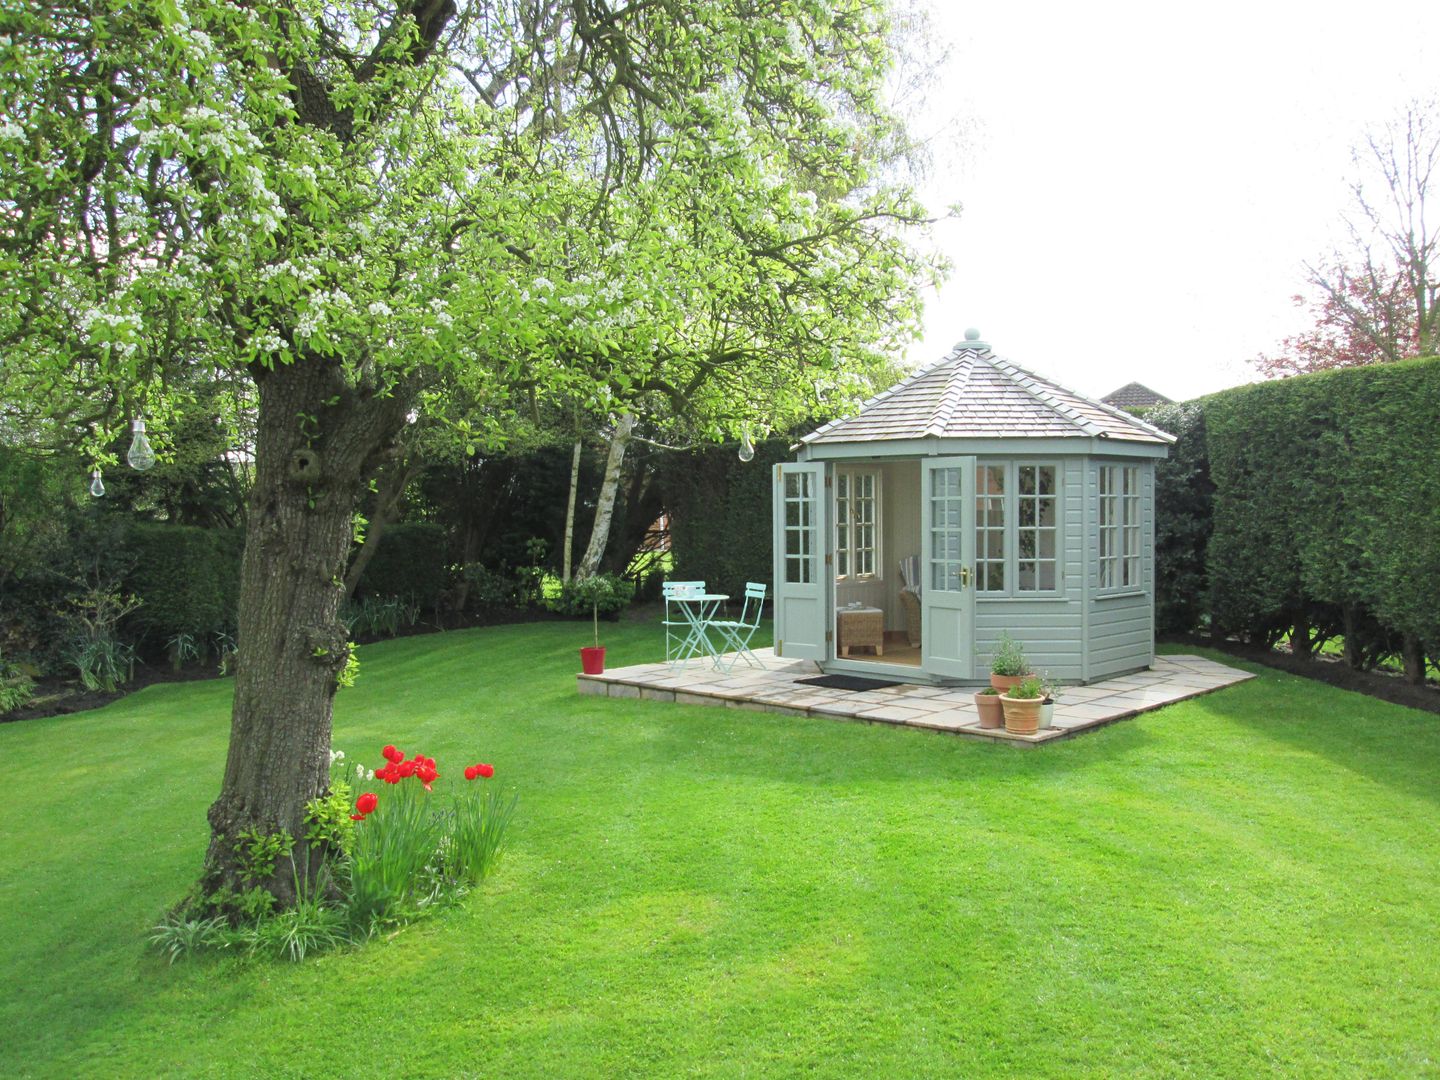 Wiveton Summerhouse with Weathered Cedar Shingles CraneGardenBuildings Classic style garage/shed Garages & sheds